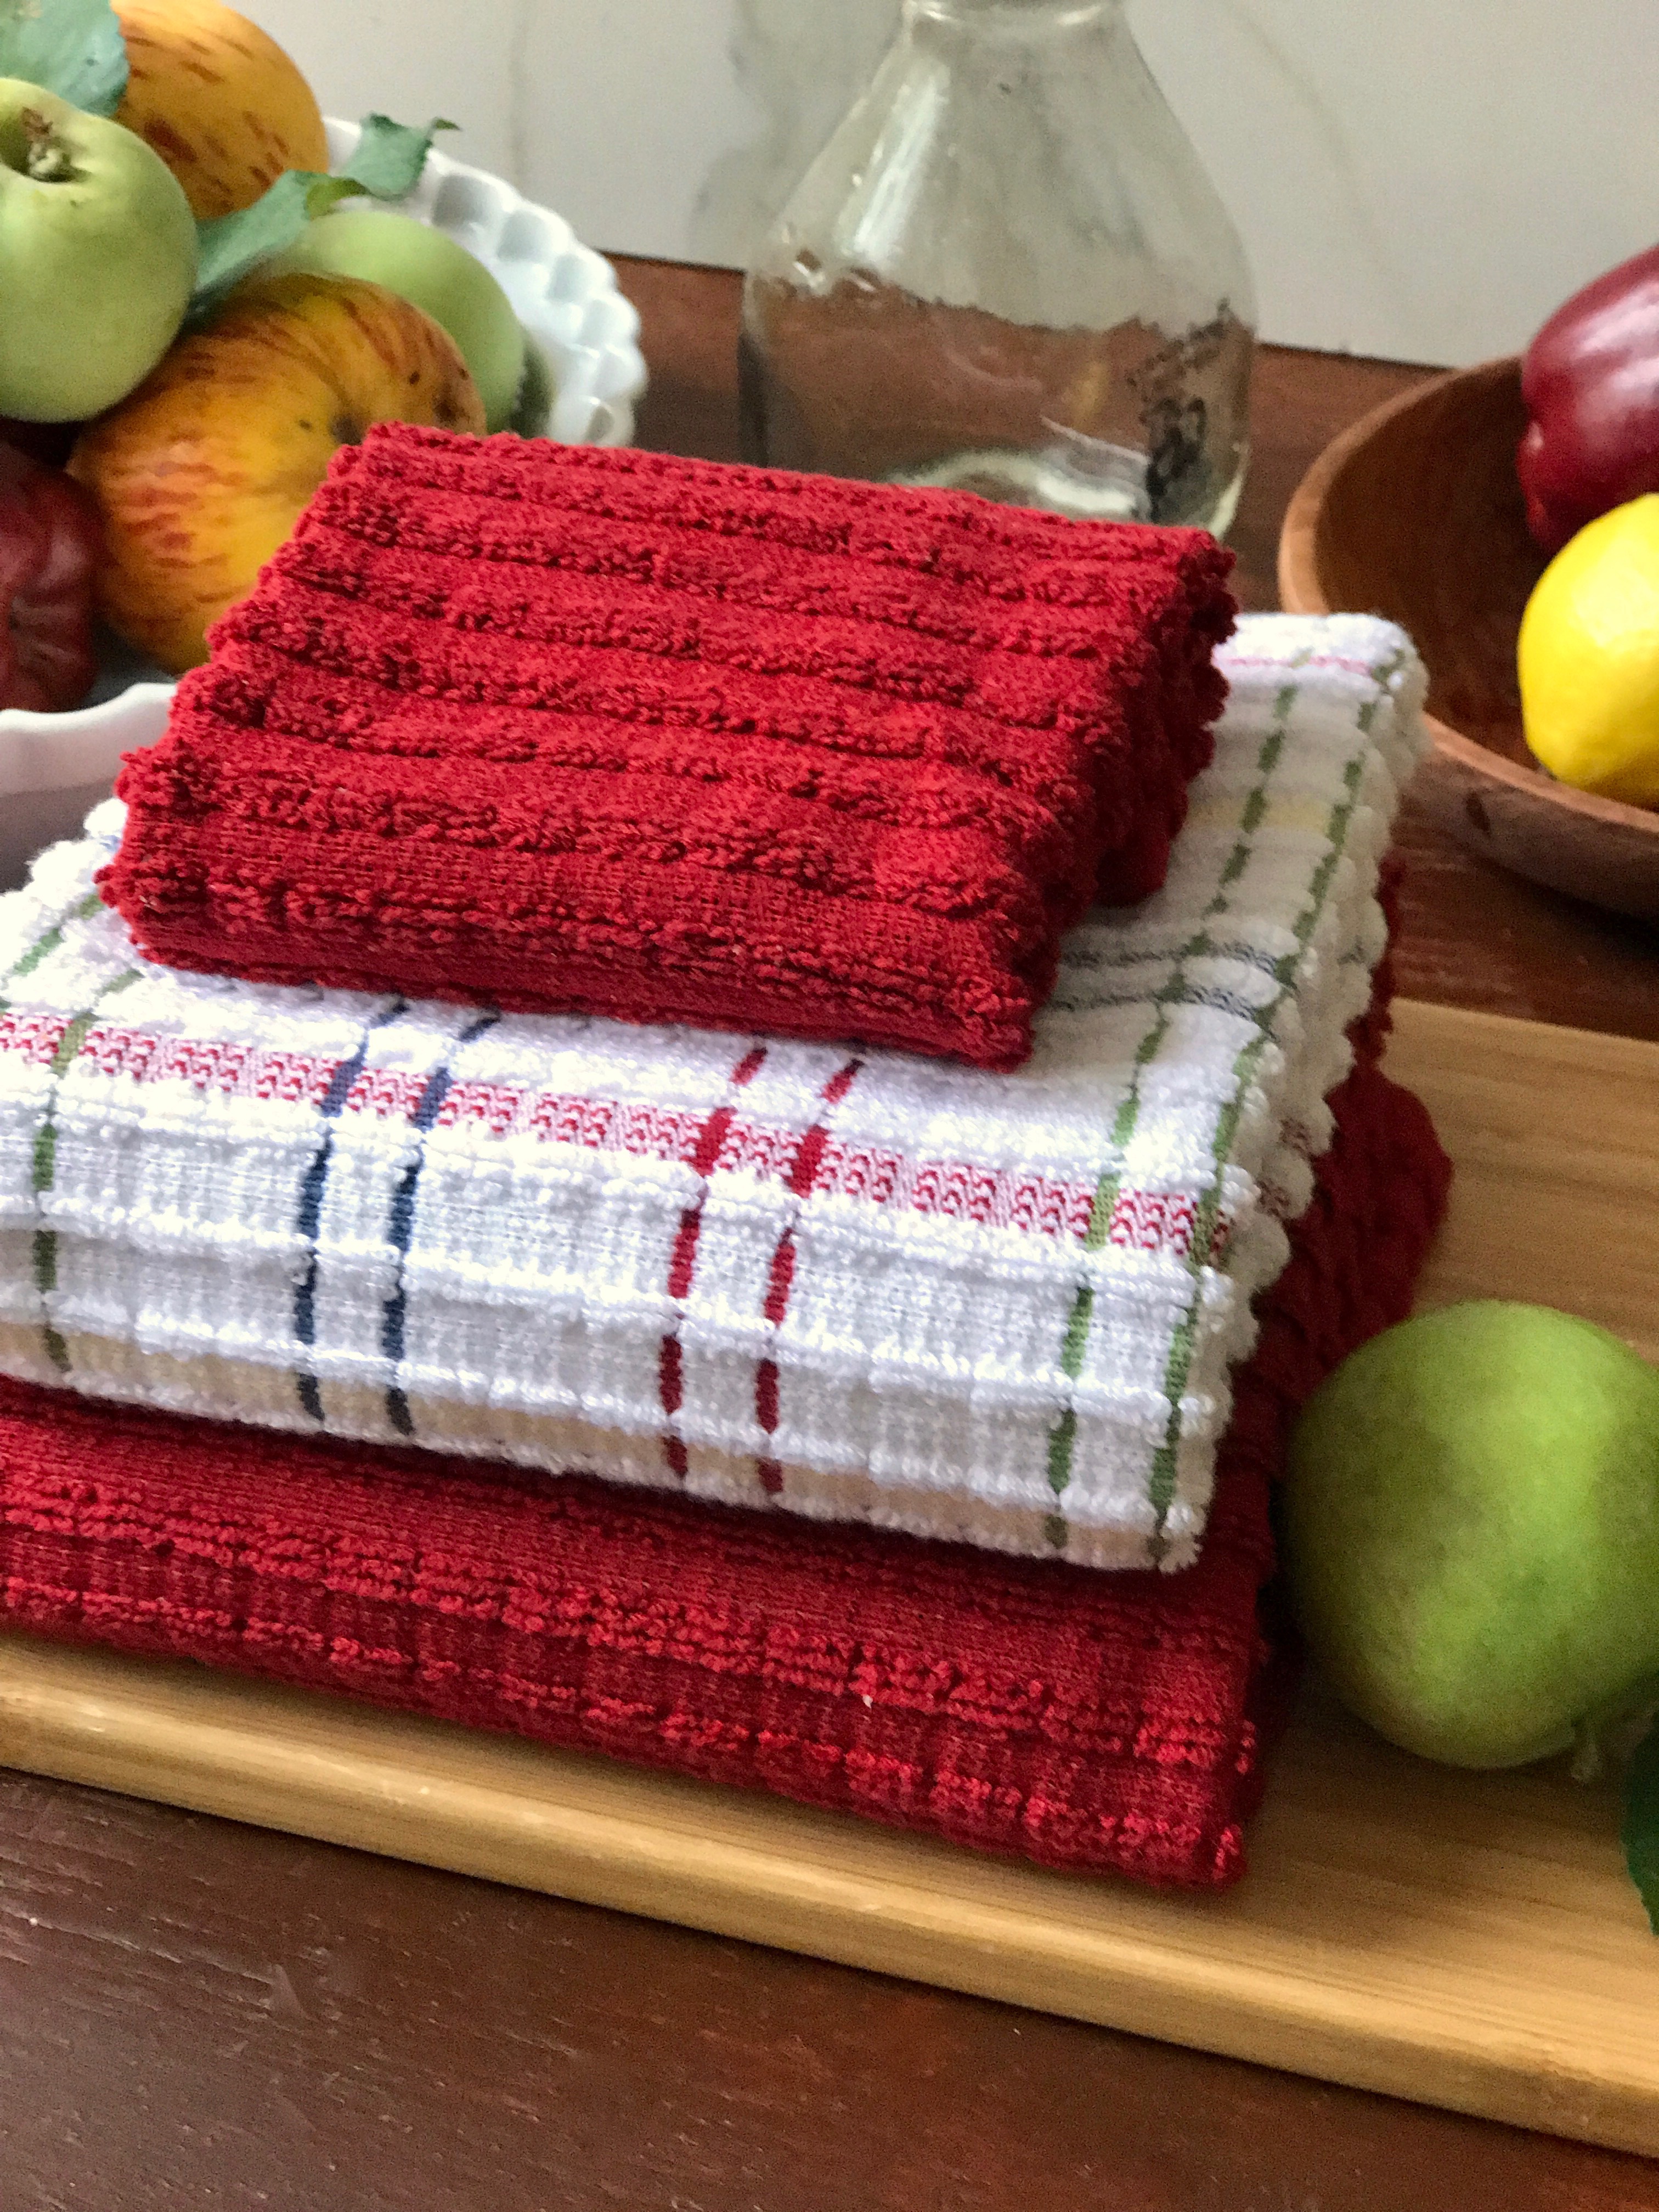 2 Pack Red Checkered Terry Dish Cloths - Set of 2